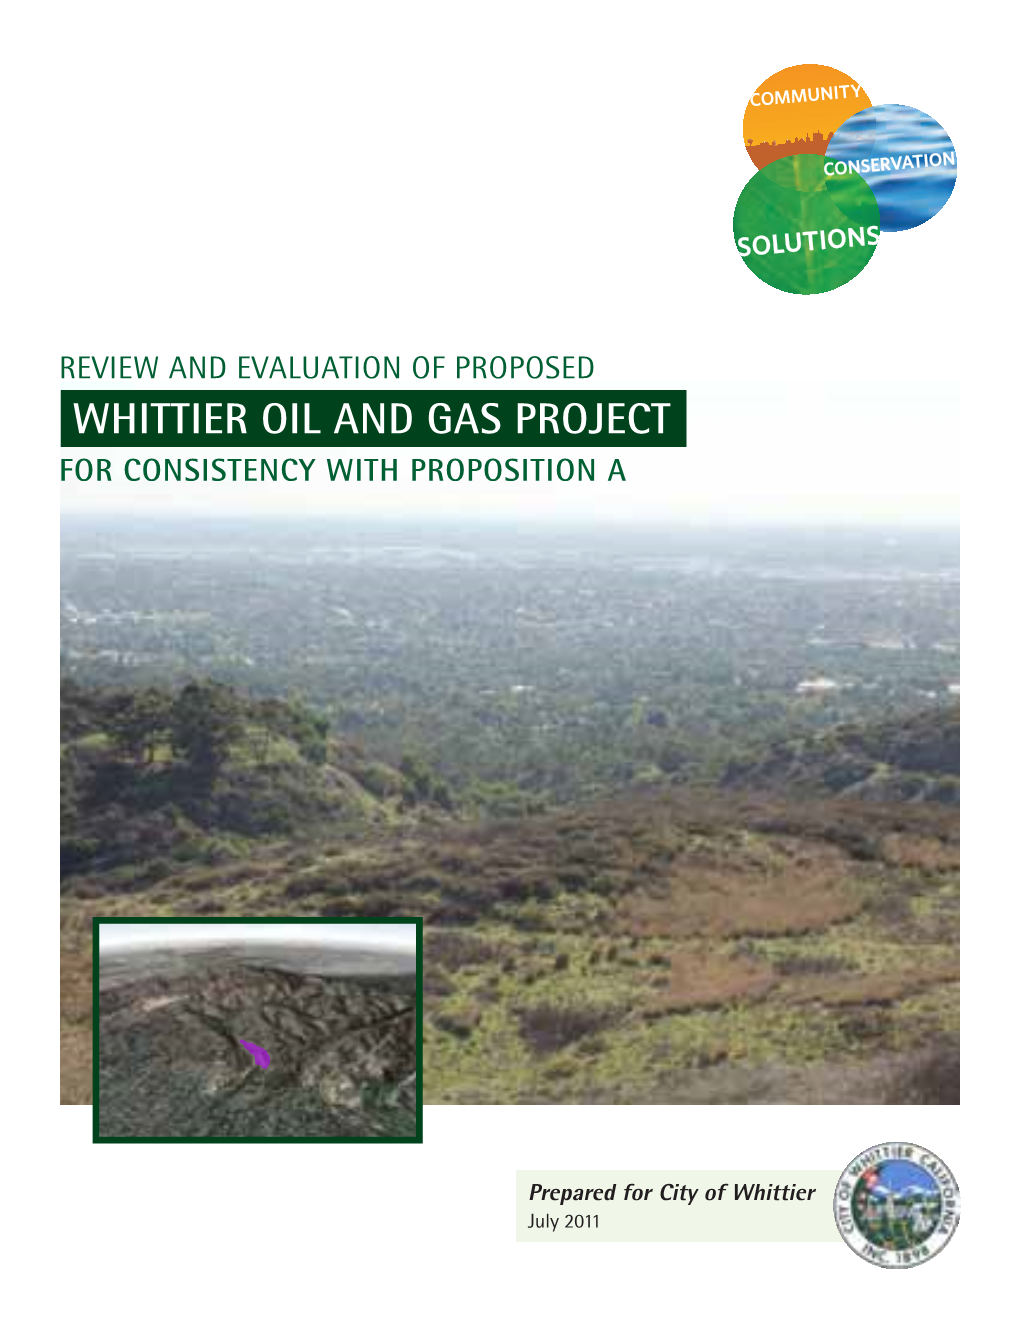 Whittier Oil and Gas Project for Consistency with Proposition A